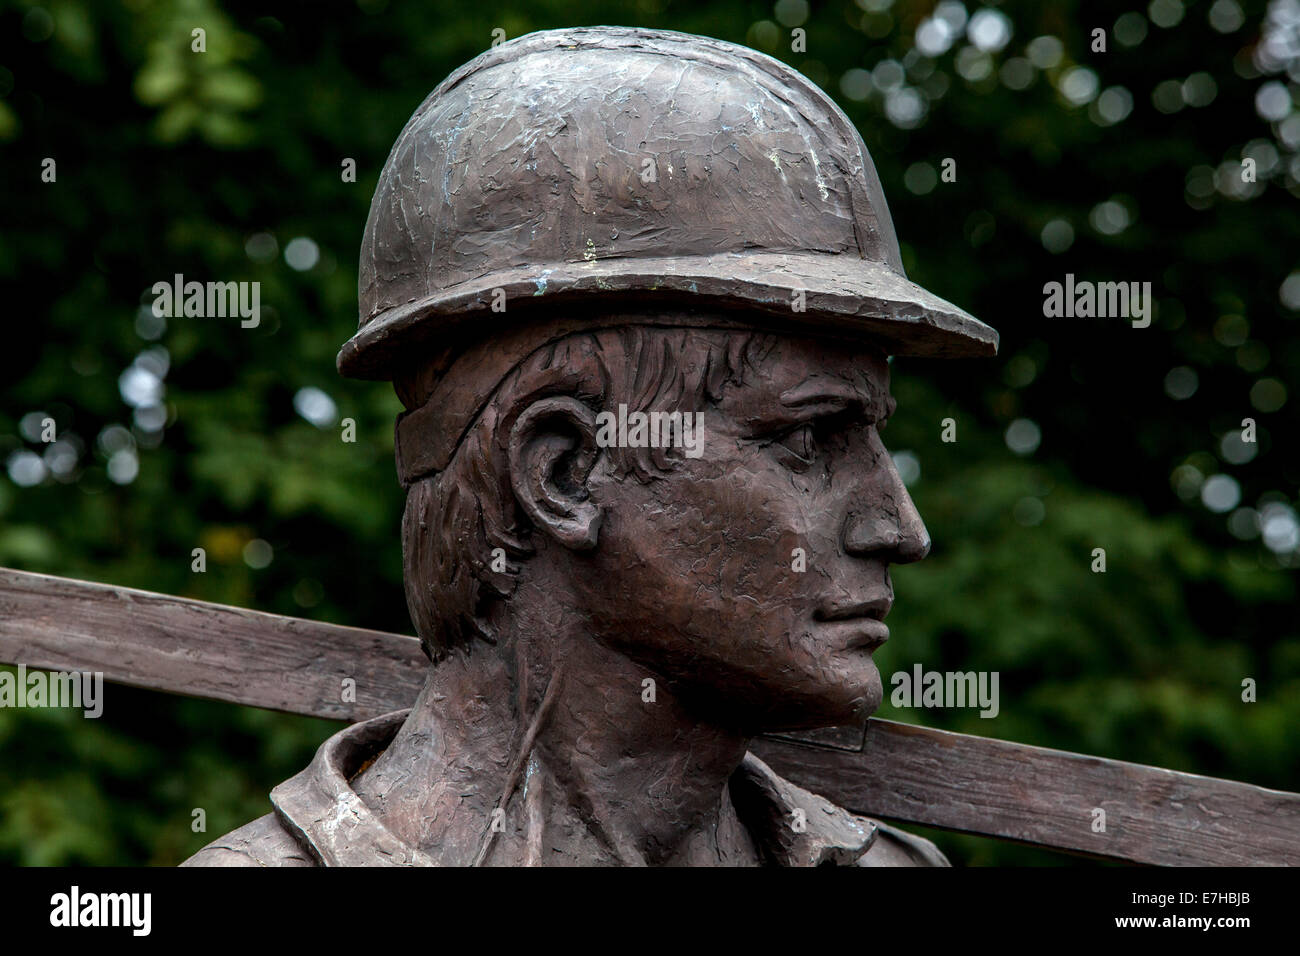 The Building Worker Statue, Tower Hill, London, England Stock Photo